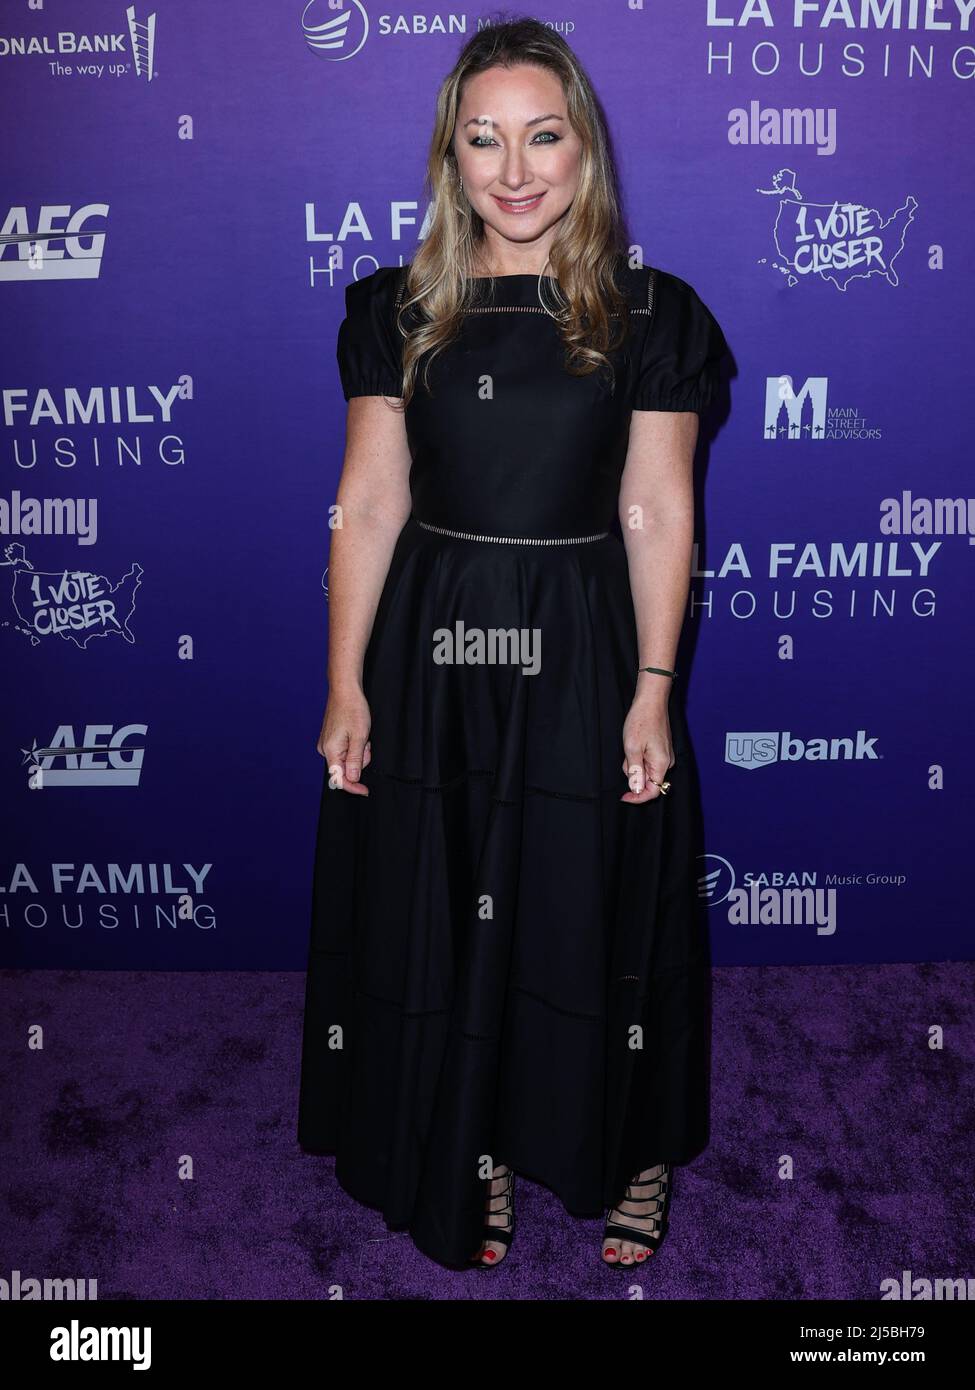 Hollywood, USA. 21st Apr, 2022. WEST HOLLYWOOD, LOS ANGELES, CALIFORNIA, USA - APRIL 21: Blair Rich arrives at the LA Family Housing (LAFH) Awards 2022 held at the Pacific Design Center on April 21, 2022 in West Hollywood, Los Angeles, California, United States. (Photo by Xavier Collin/Image Press Agency) Credit: Image Press Agency/Alamy Live News Stock Photo